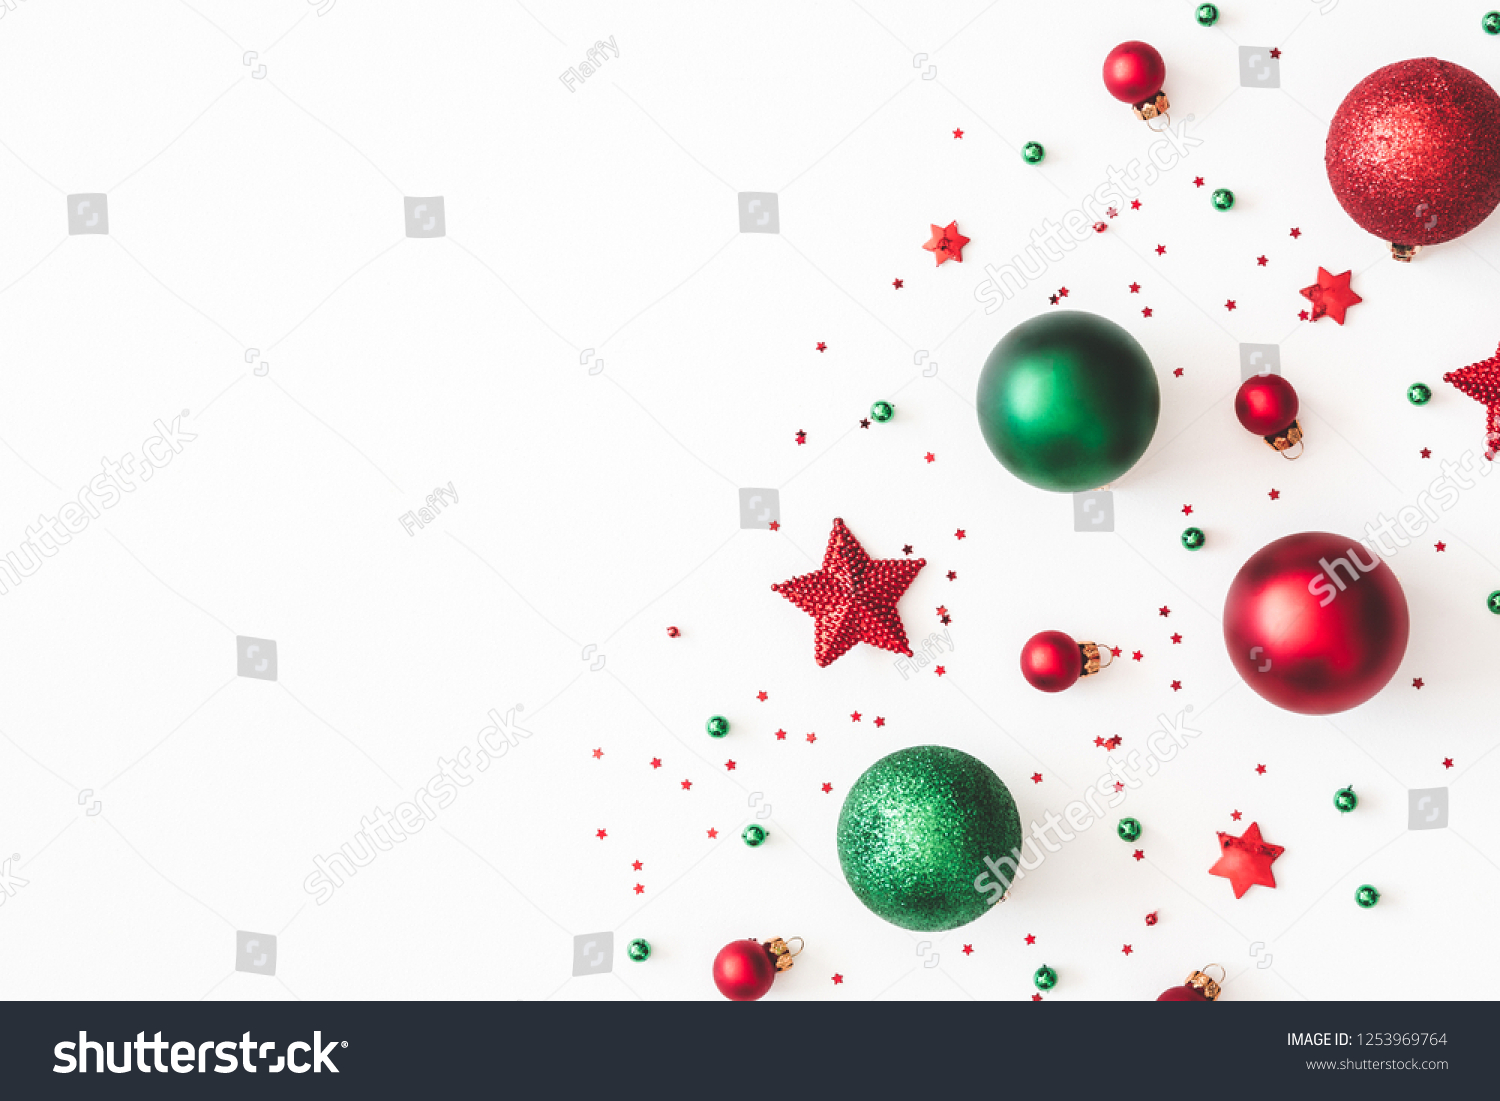 Christmas composition. Christmas red and green decorations on white background. Flat lay, top view, copy space #1253969764